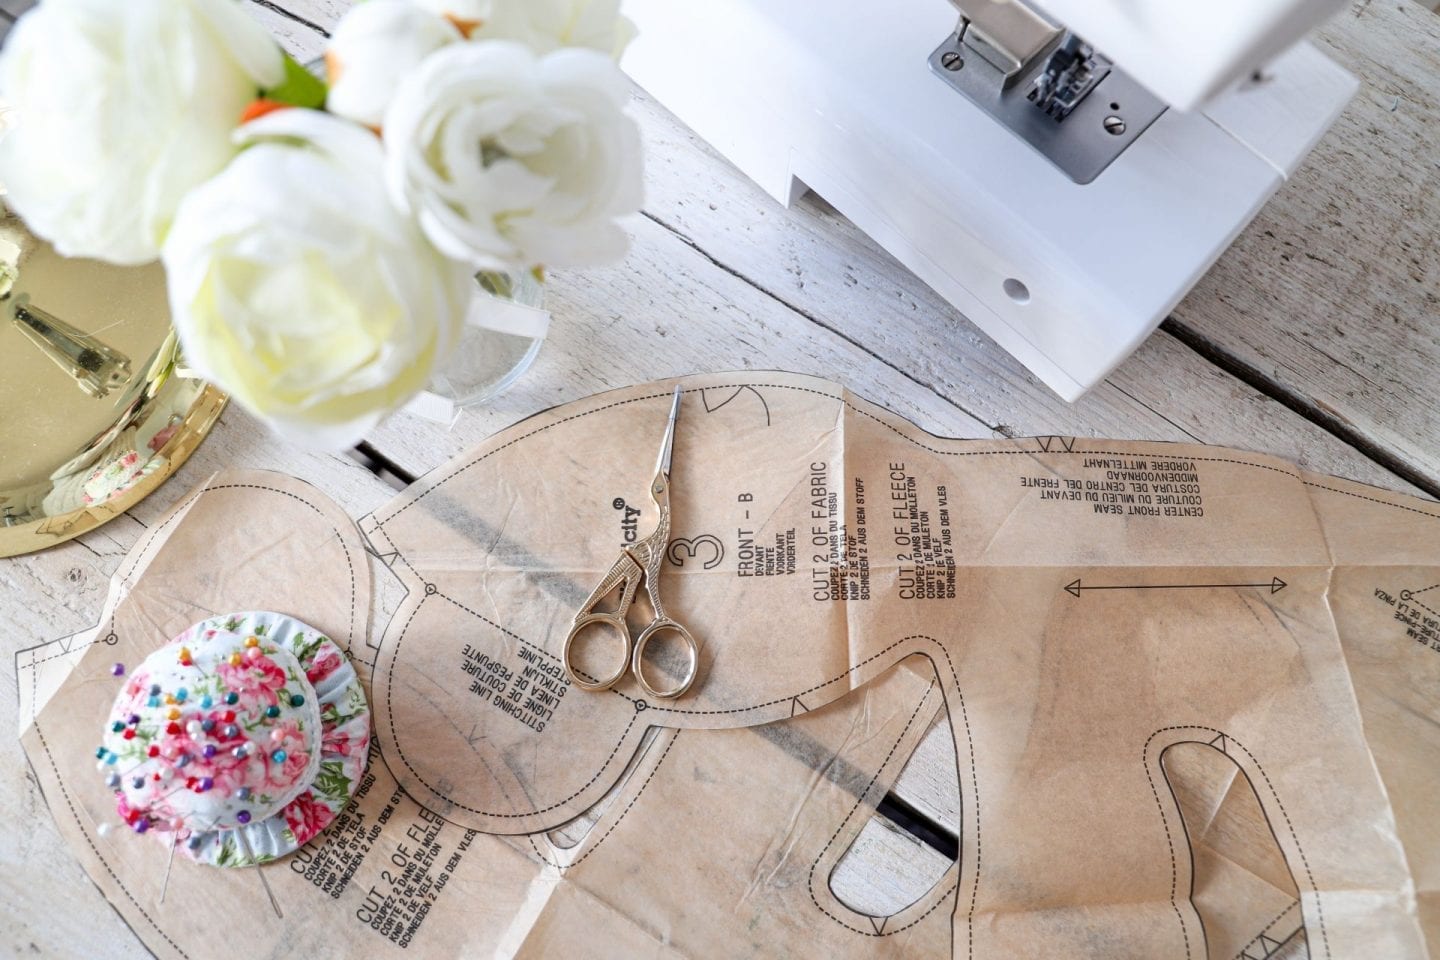 Top tips for buying a sewing machine